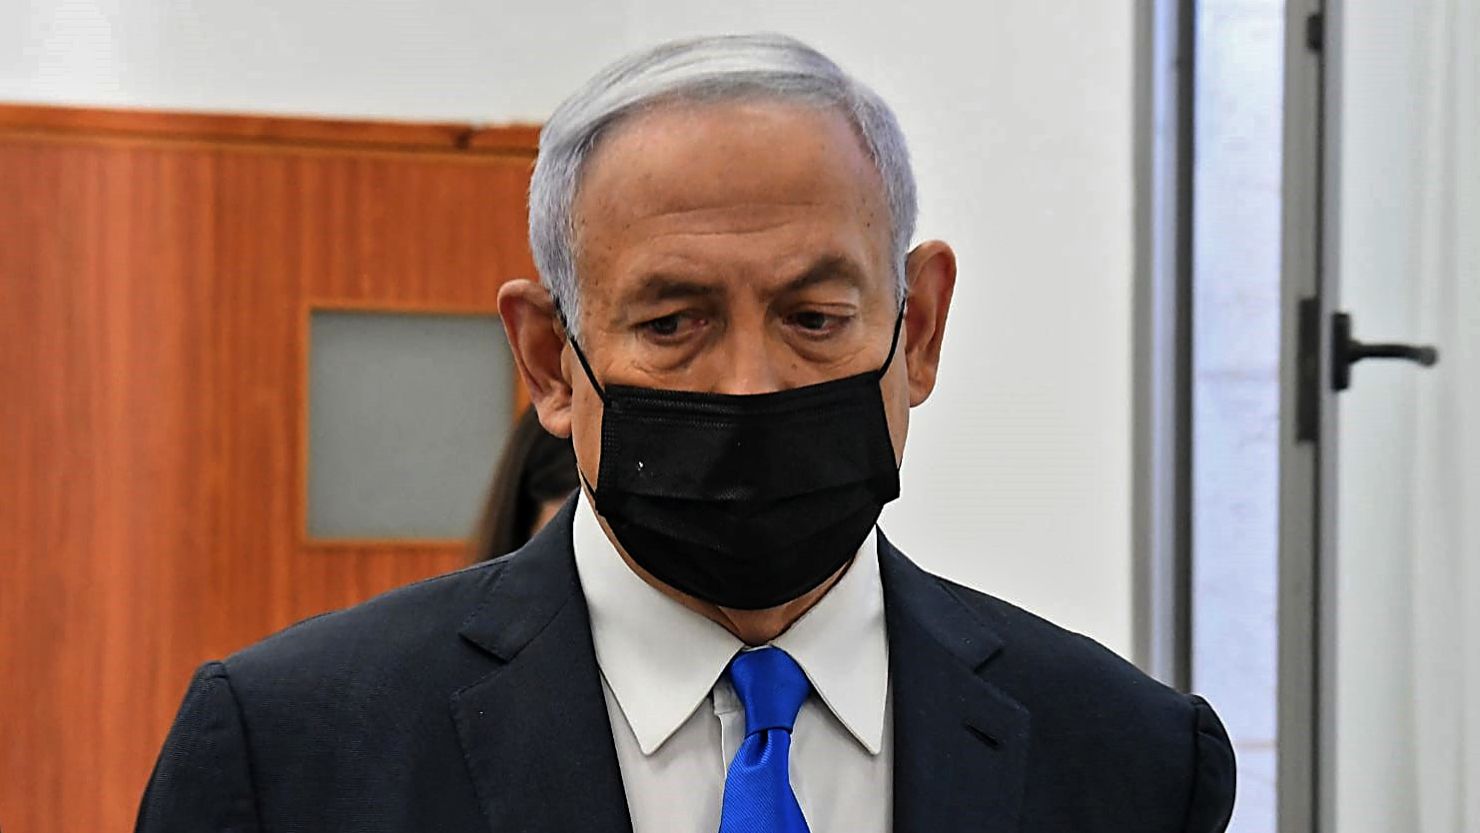 Israeli Prime Minister Benjamin Netanyahu arrives to a hearing in his corruption trial at the Jerusalem district court, on February 8.